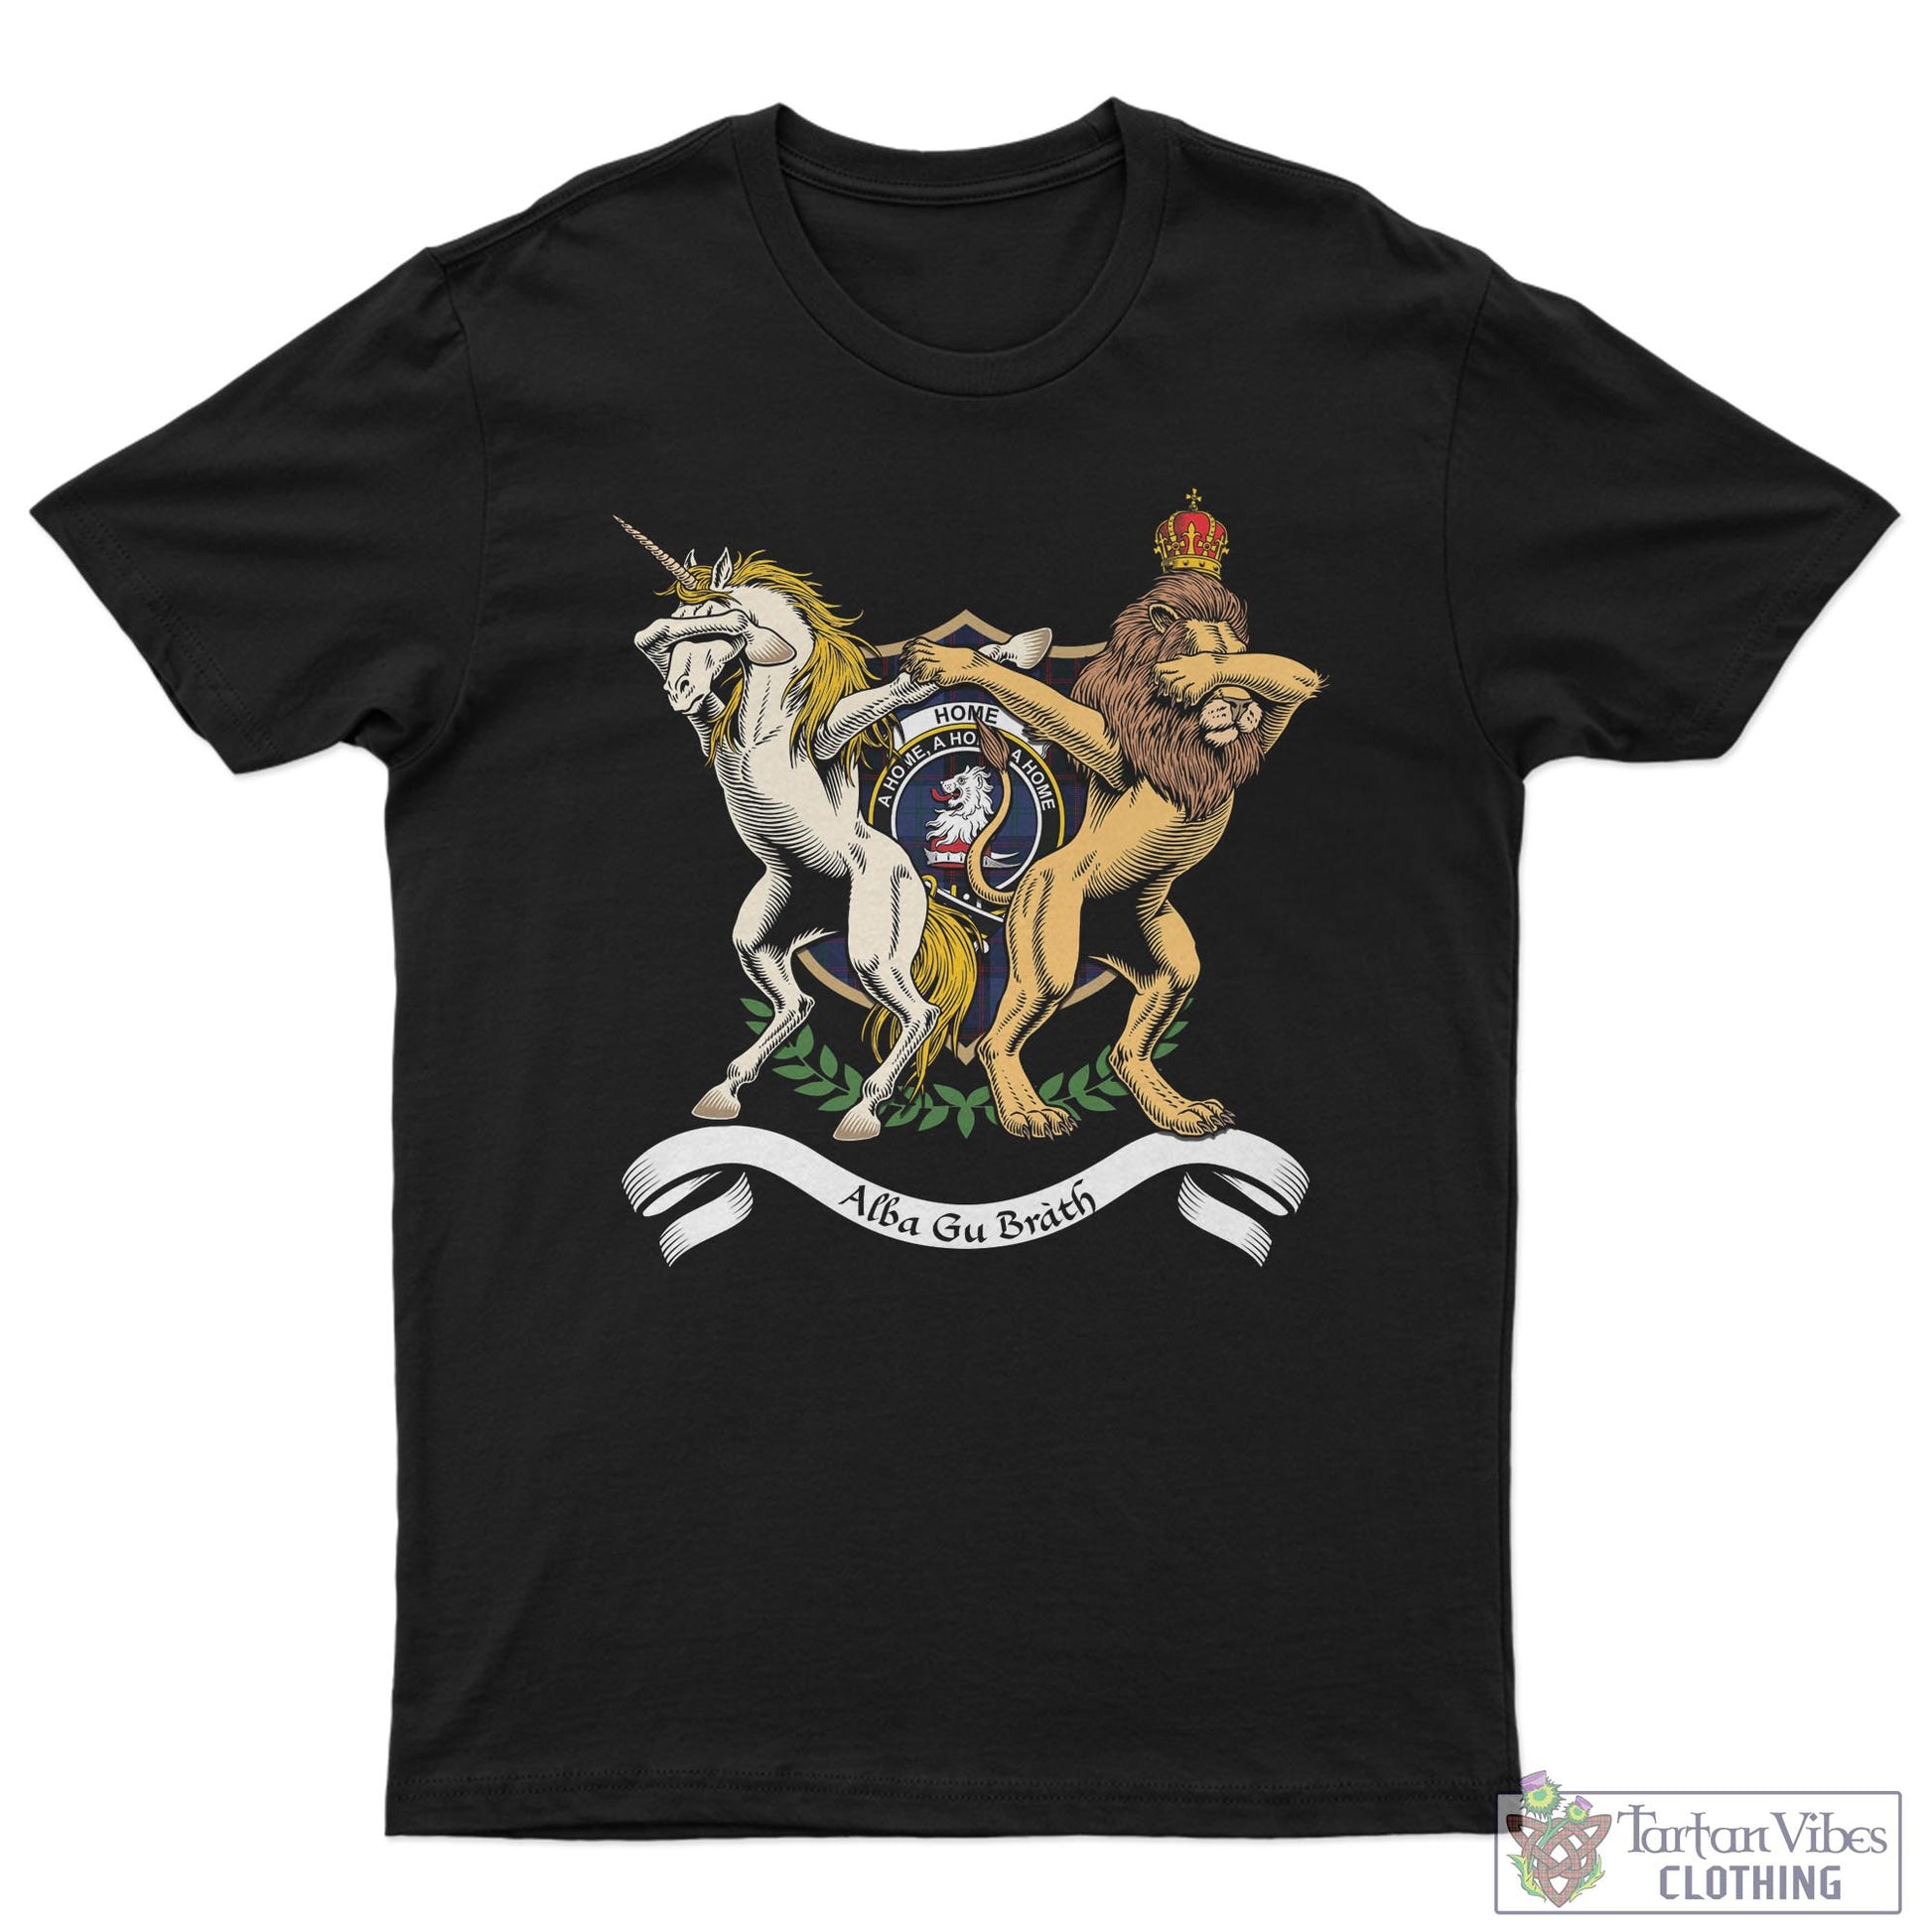 Tartan Vibes Clothing Home (Hume) Family Crest Cotton Men's T-Shirt with Scotland Royal Coat Of Arm Funny Style